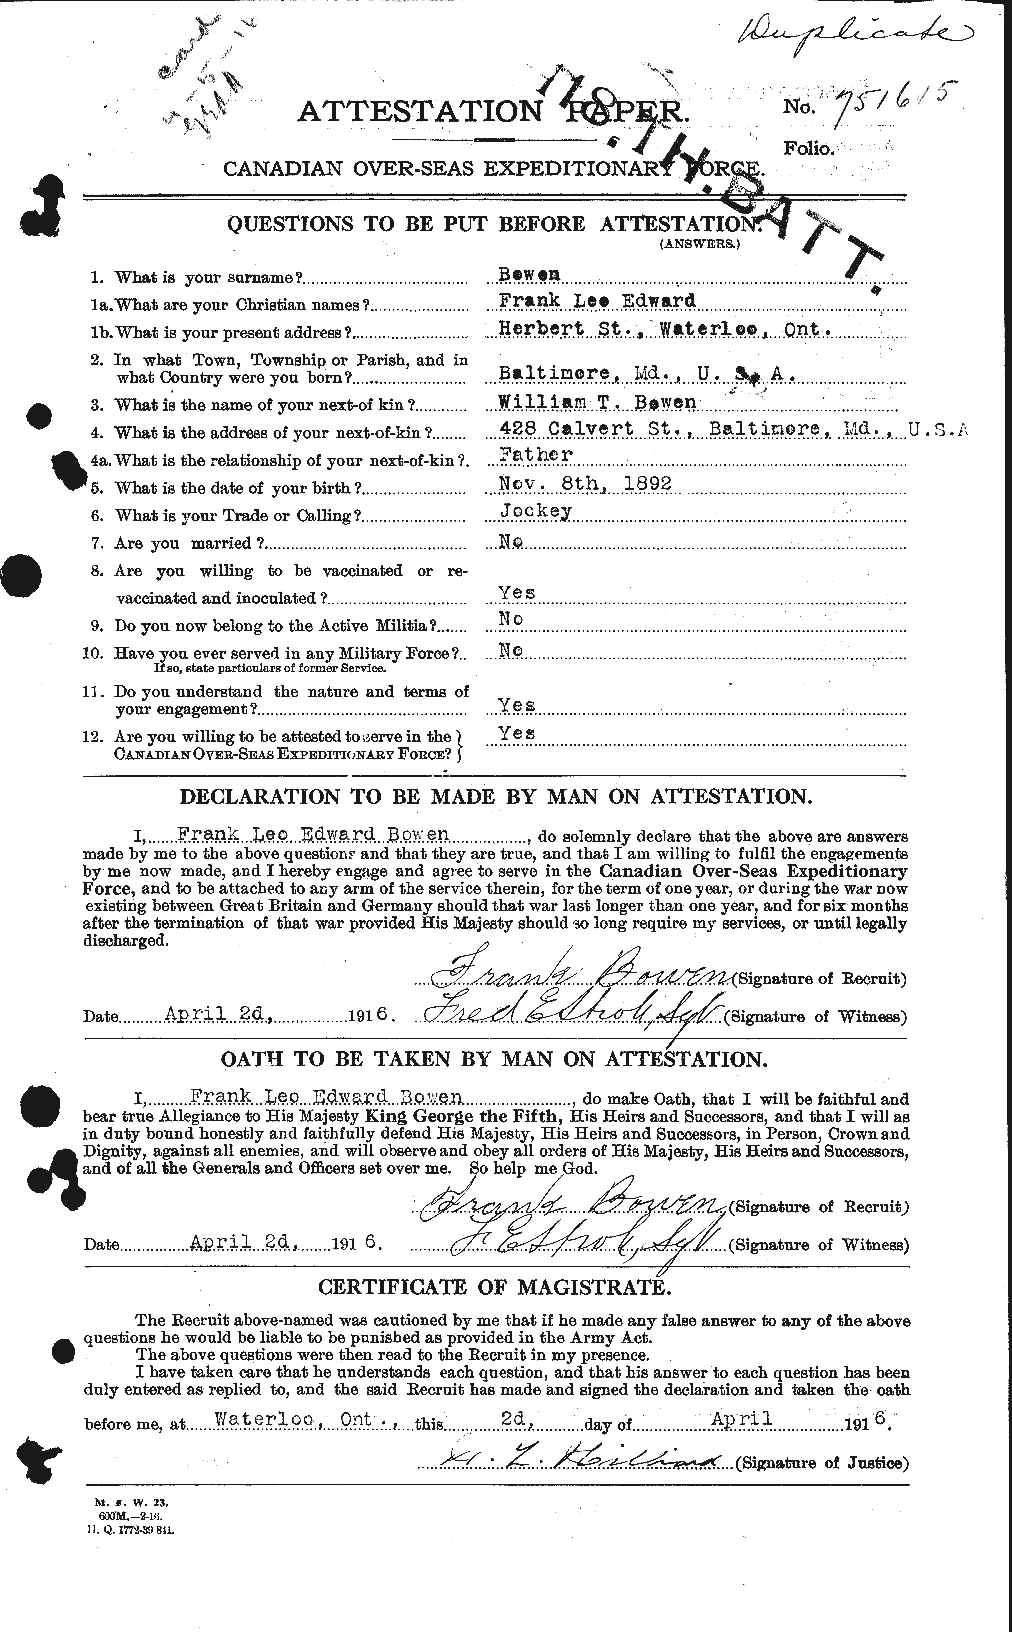 Personnel Records of the First World War - CEF 255389a